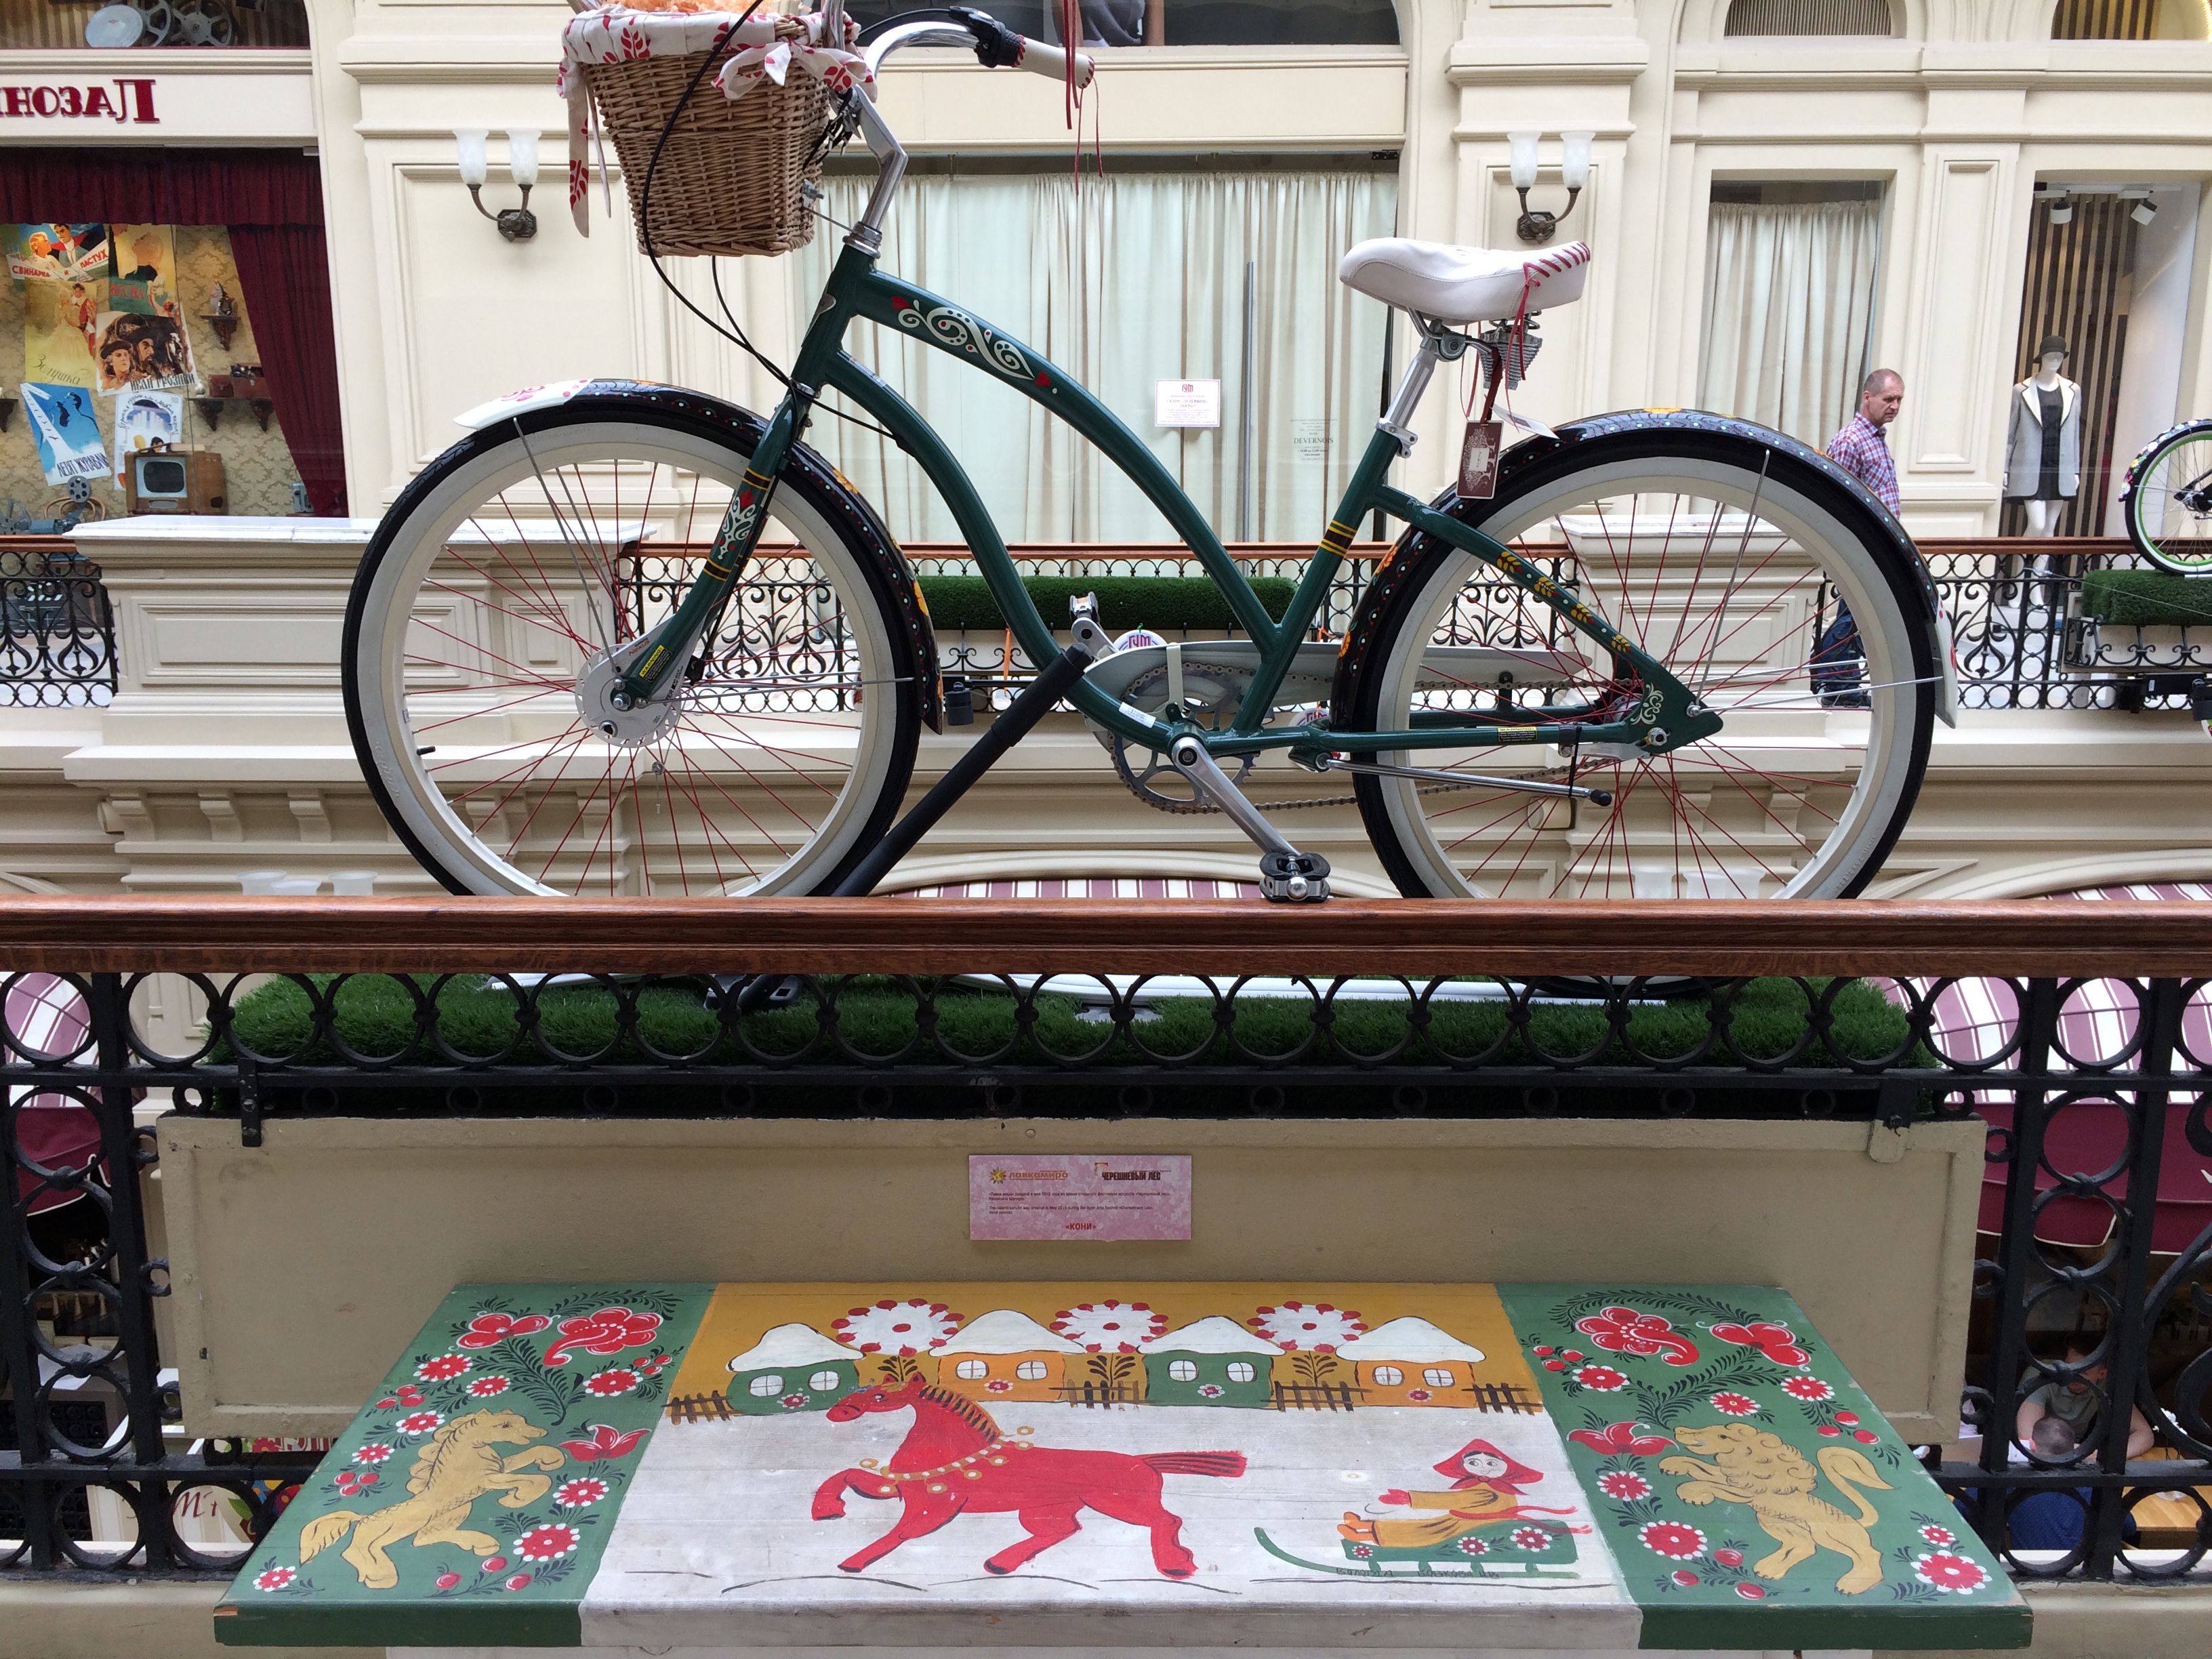 One of the bicycles and decorated tables